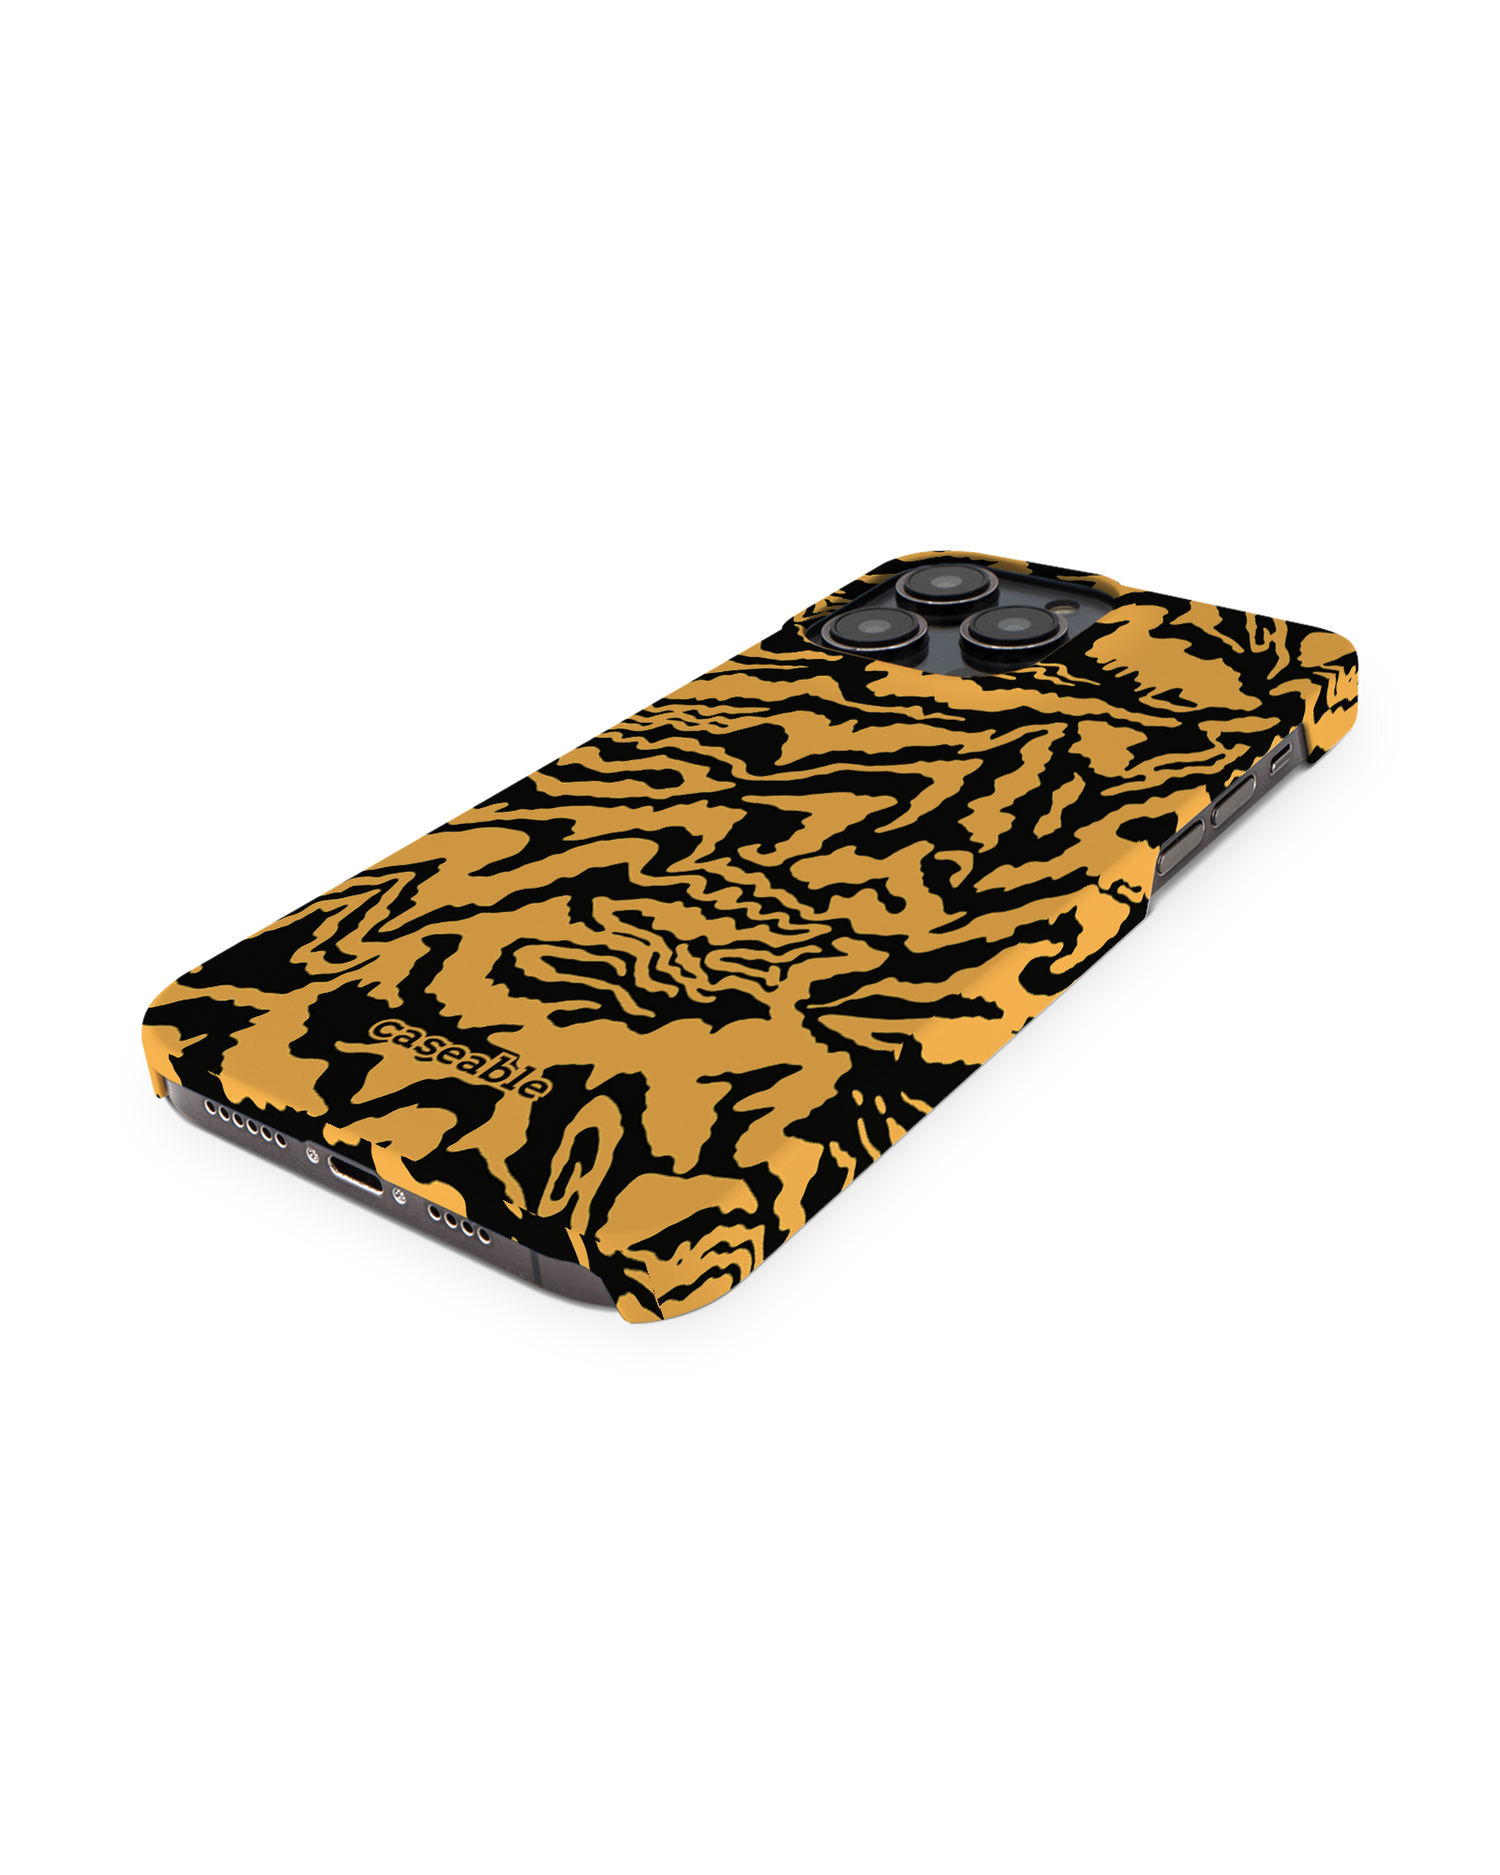 Warped Tiger Stripes Hard Shell Phone Case for Apple iPhone 14 Pro Max: Perspective view